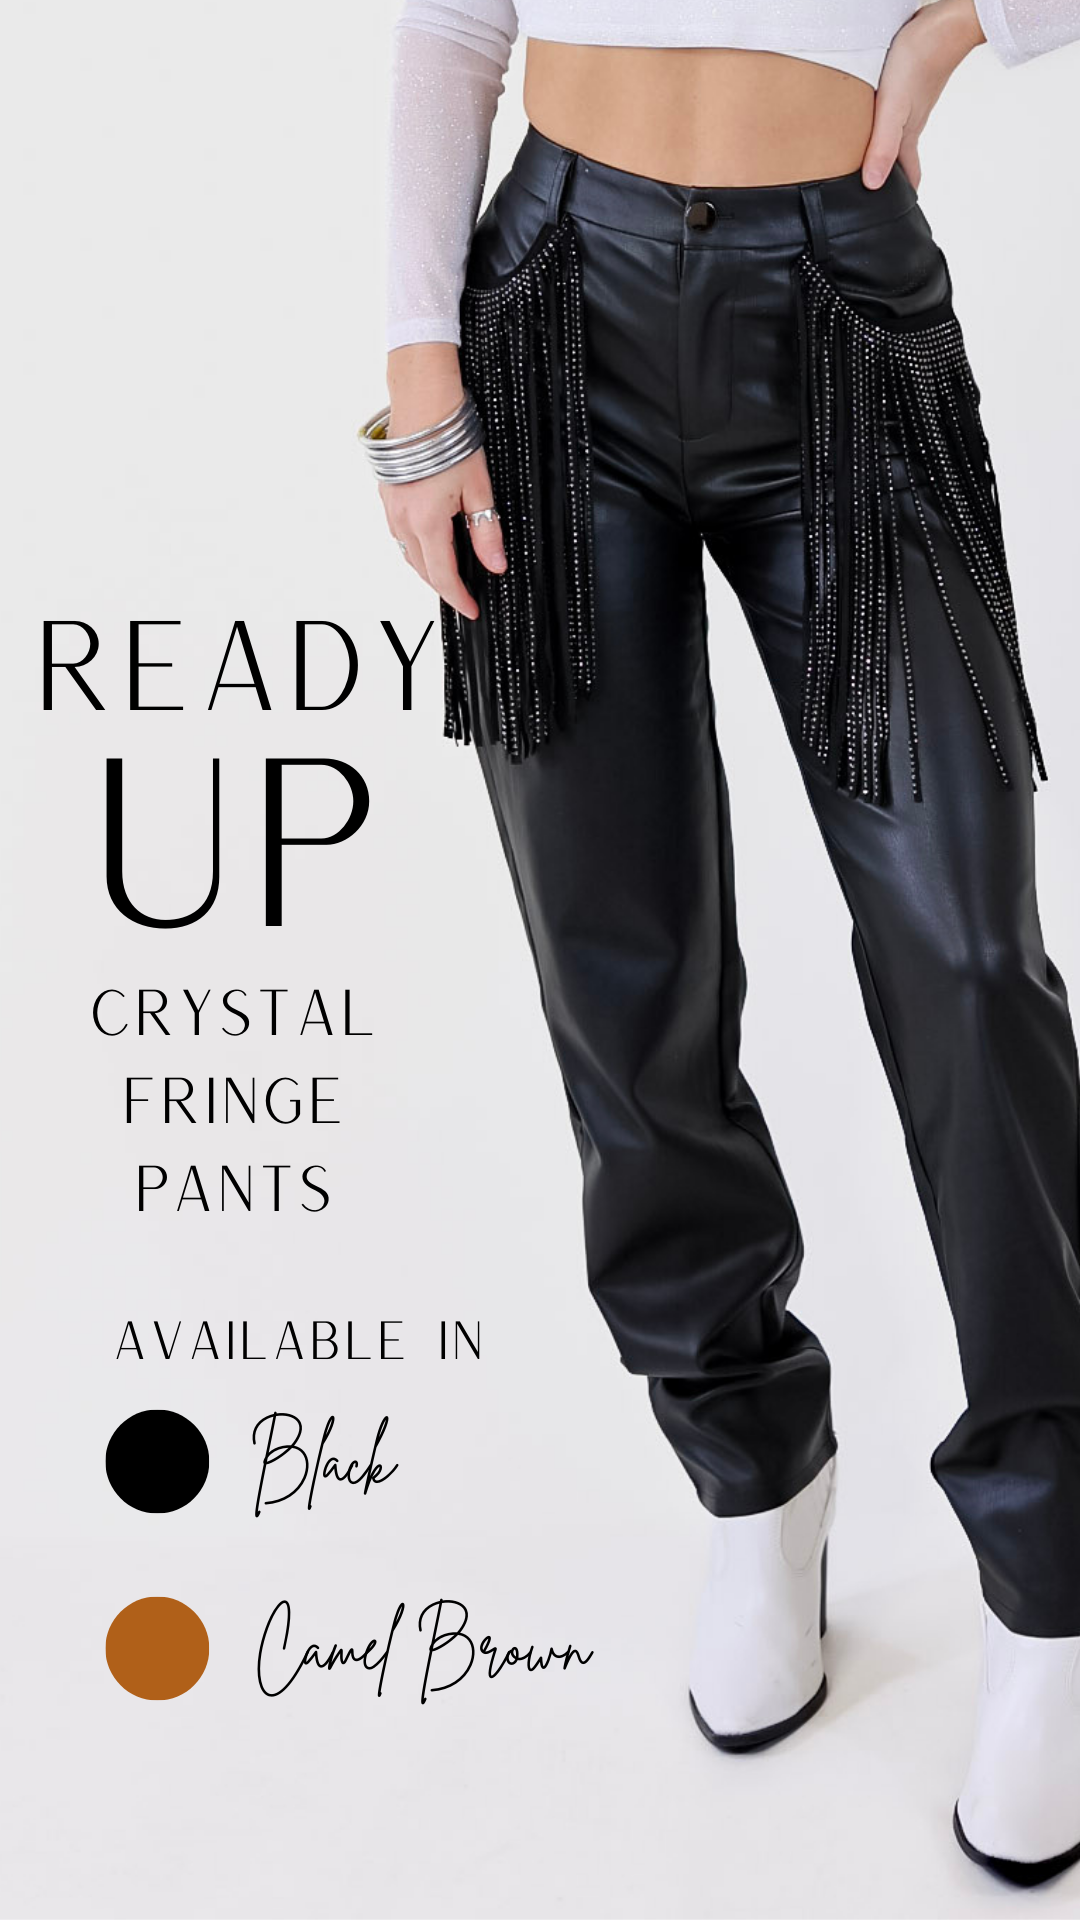 Ready Up Crystal Fringe Faux Leather Pants in Black